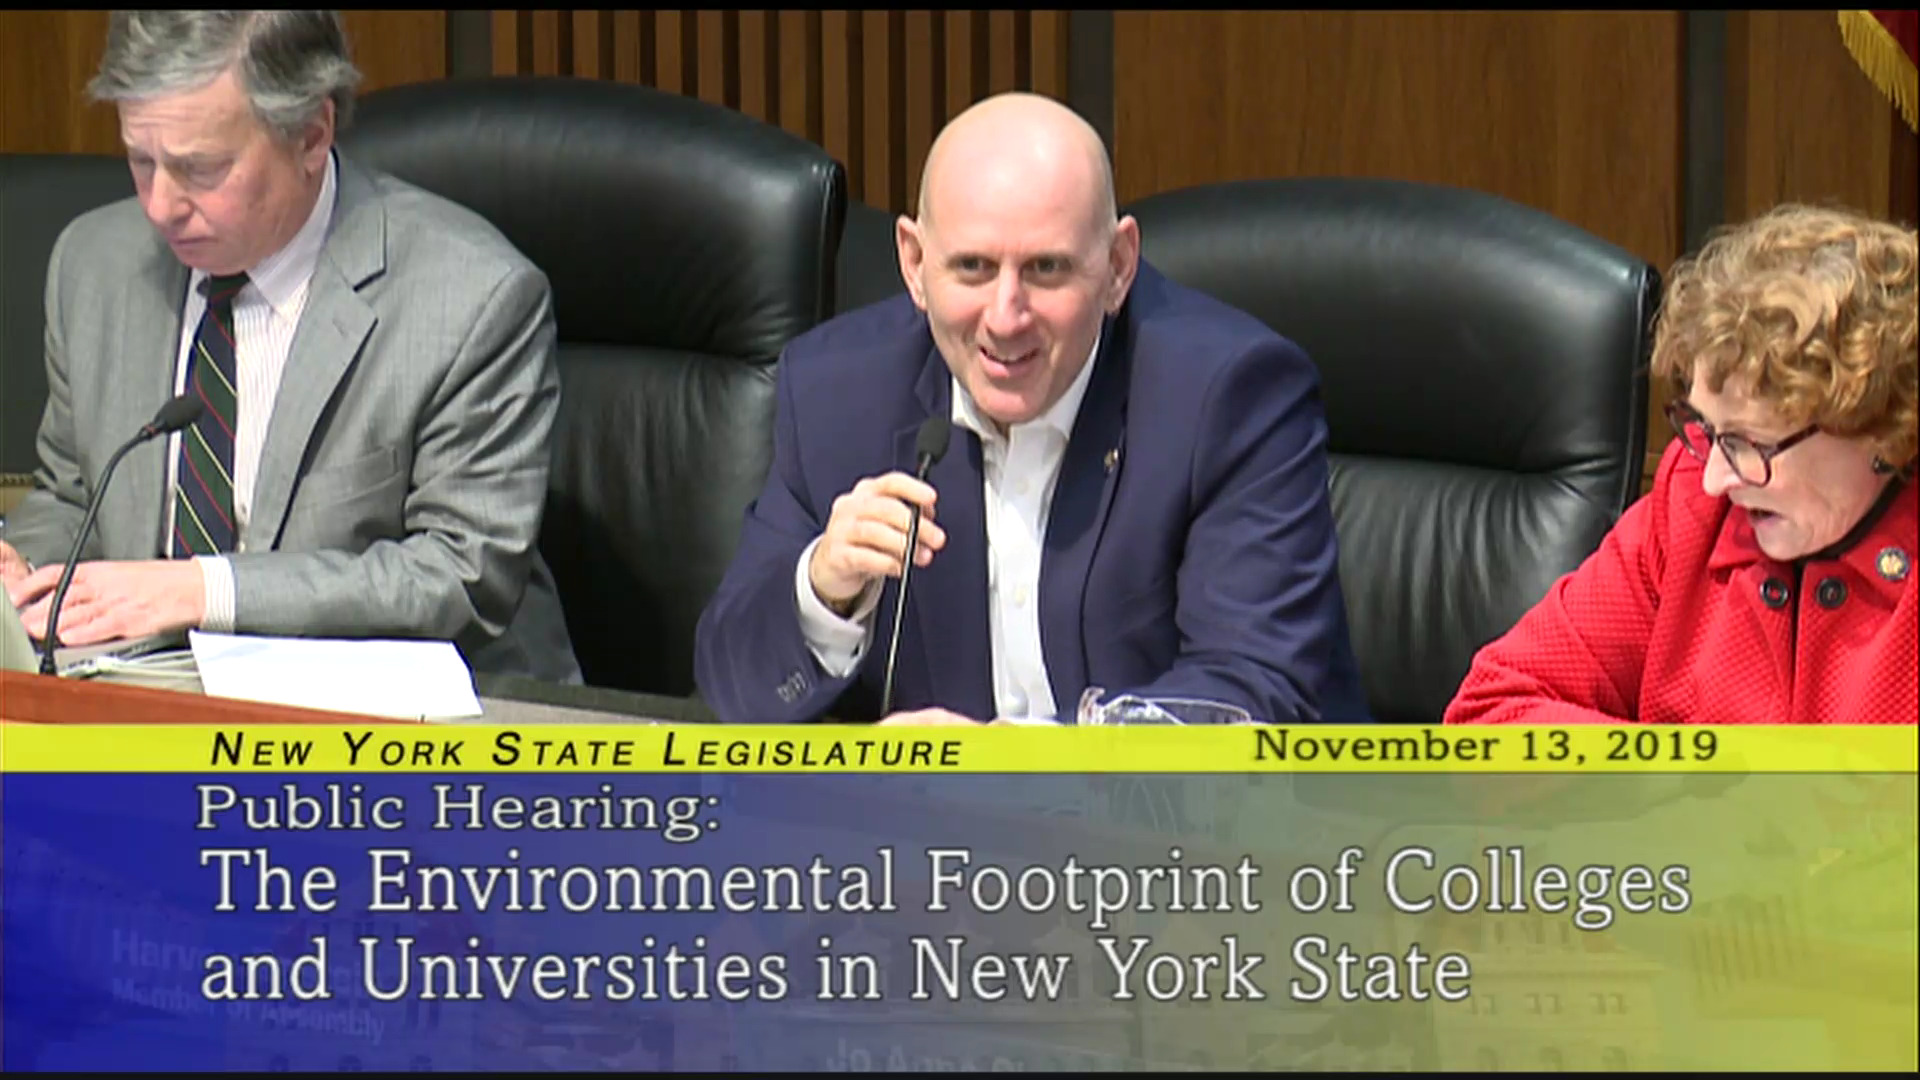 Public Hearing on Environmental Footprint of Colleges and Universities in NY